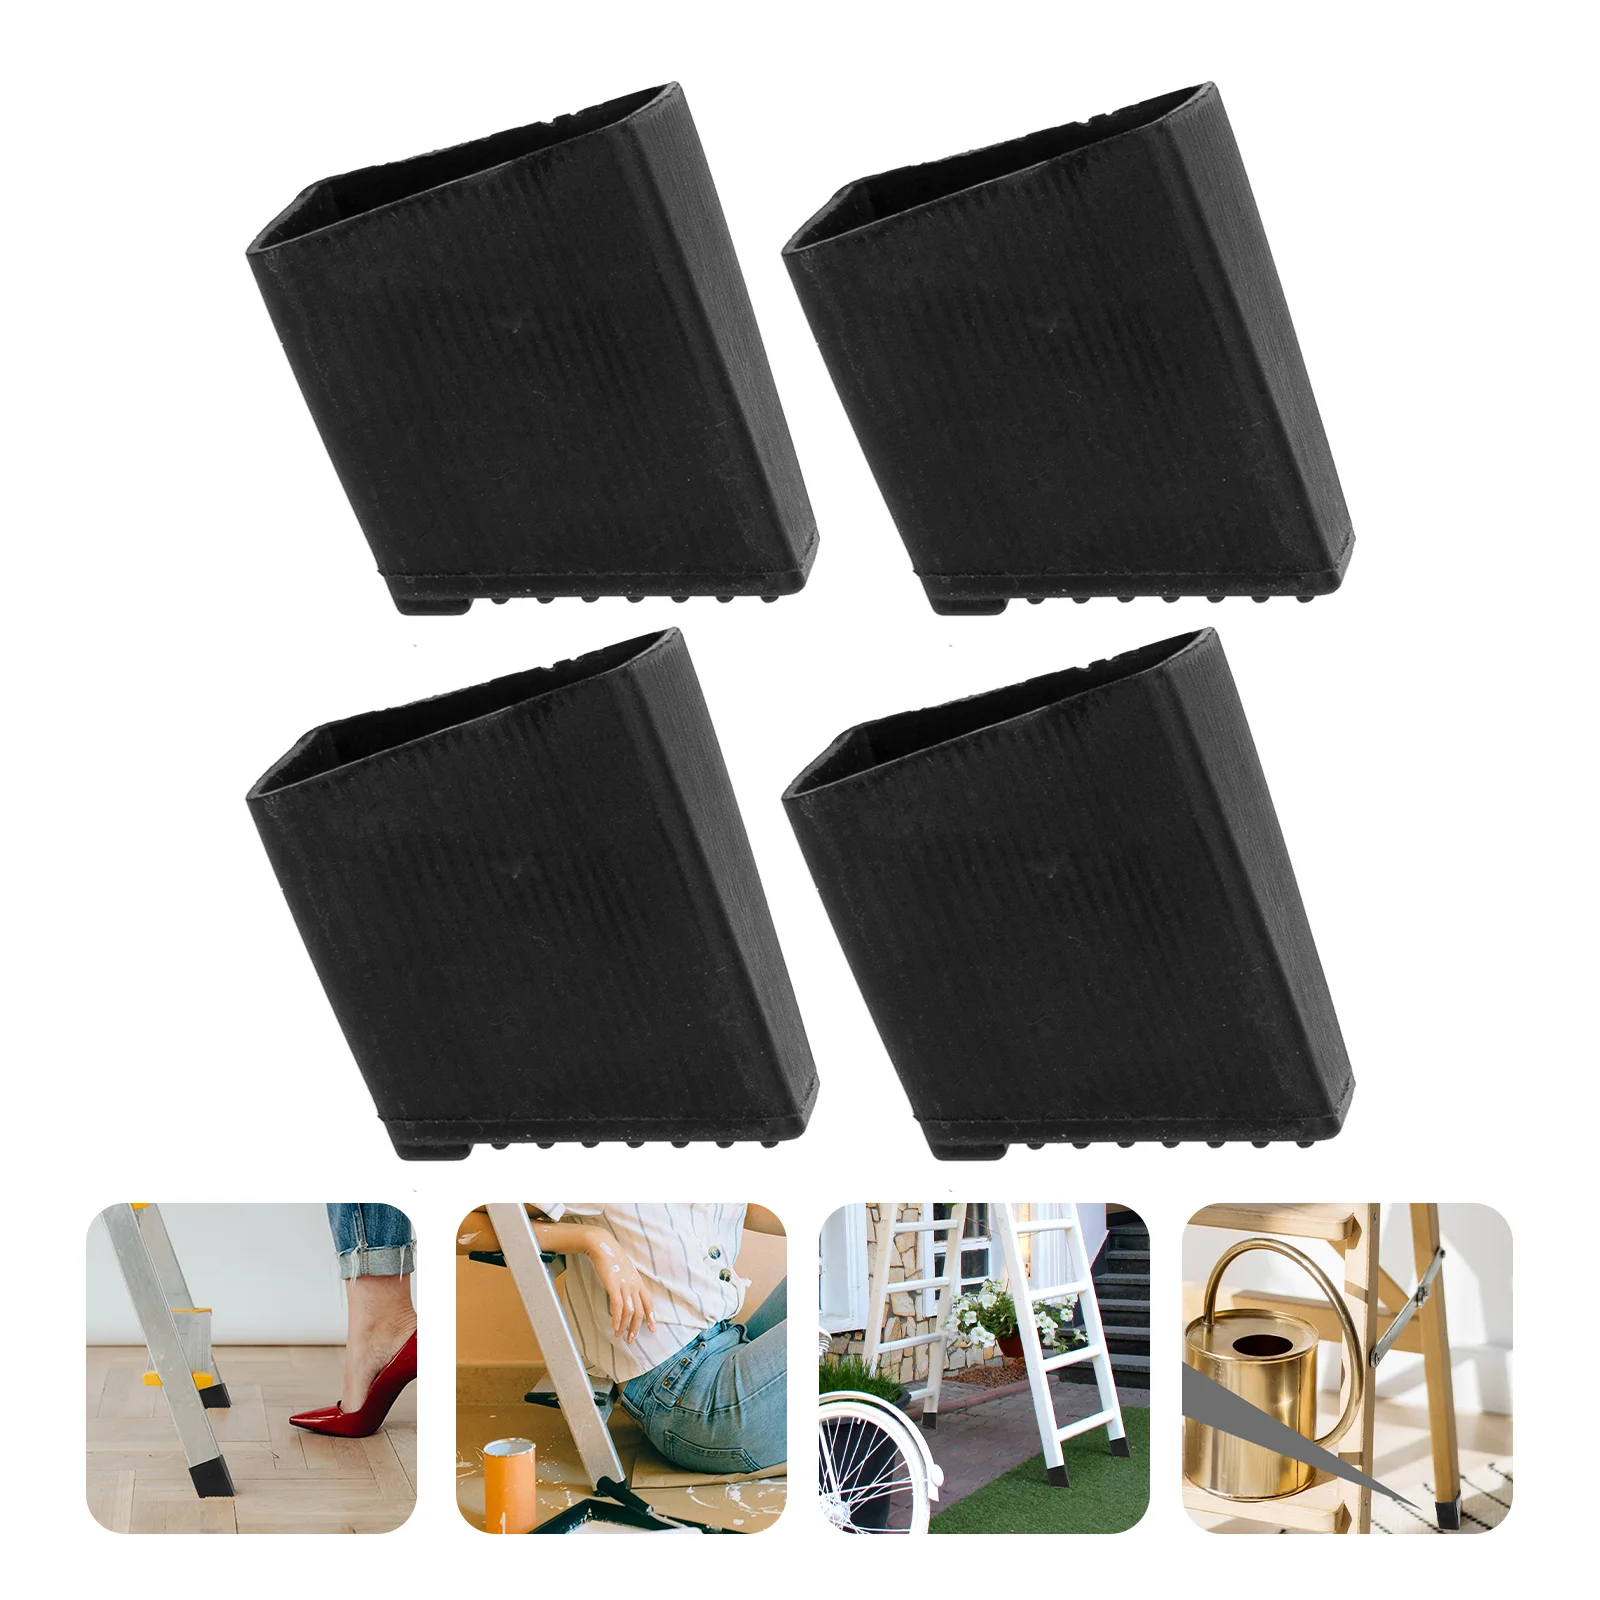 

4 Pcs Folding Outdoor Chairs Ladder Foot Cover Pad Butt Mat Legs Engineering Pads Protective Rubber Fittings Non-skid